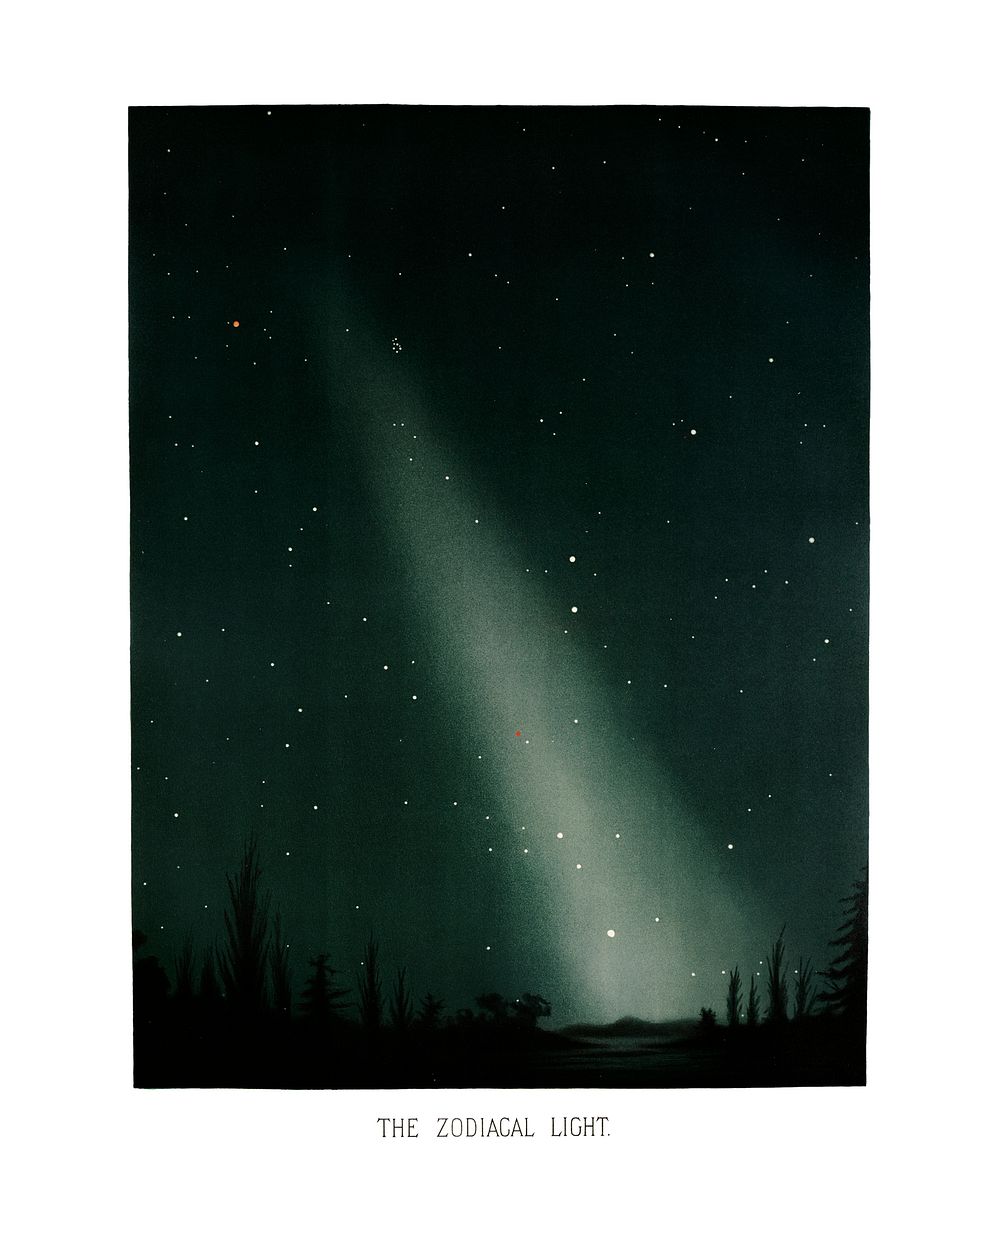 The zodiacal light from the Trouvelotillustration wall art print and poster.